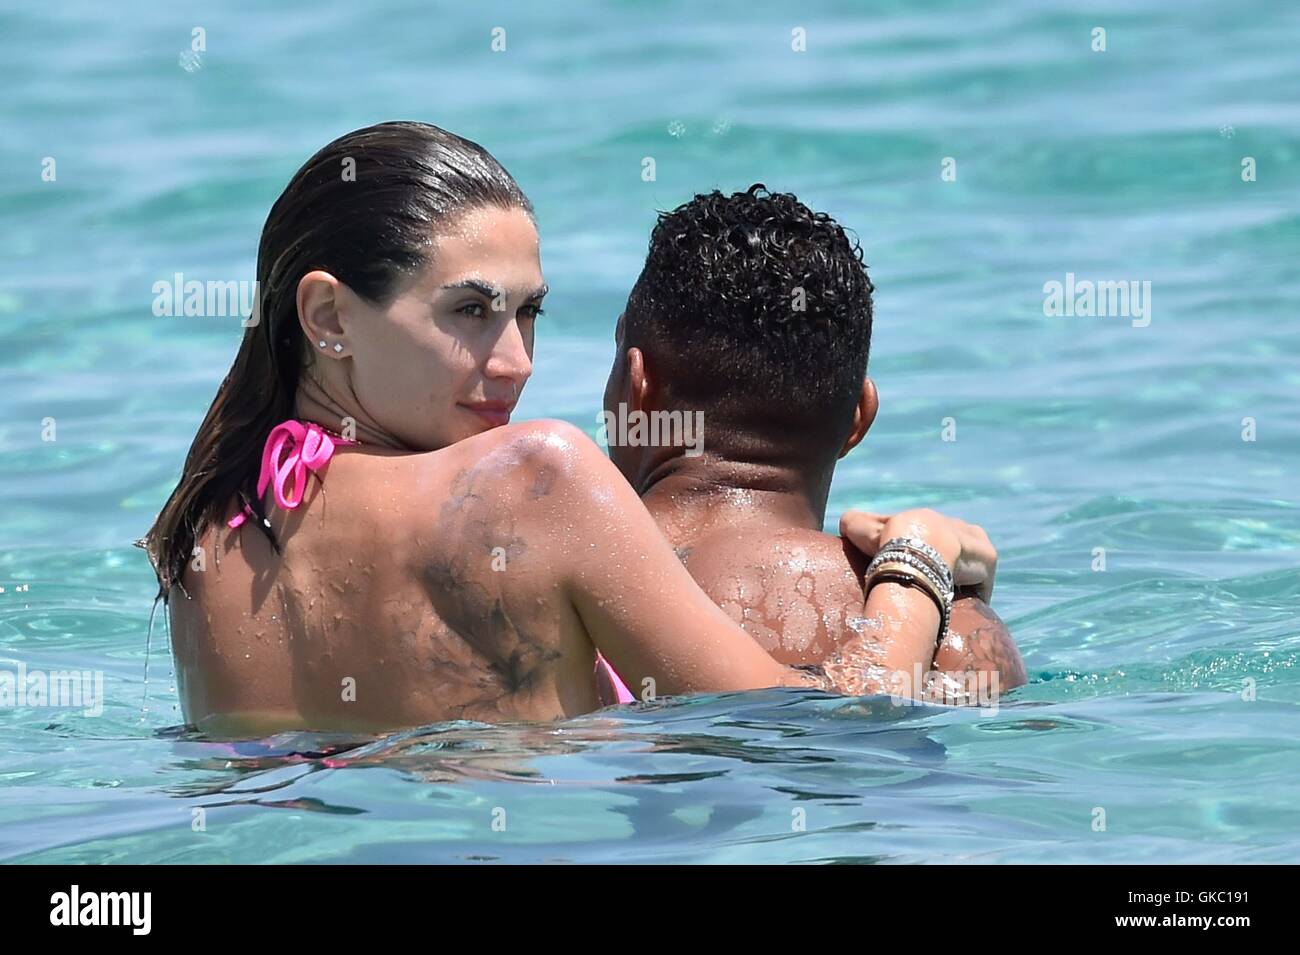 Kevin-Prince Boateng with his wife Melissa Satta and their son Maddox  enjoying a holiday at the white club beach in Sardinia Featuring:  Kevin-Prince Boateng, Melissa Satta Where: Sardinia, Italy When: 23 Jun